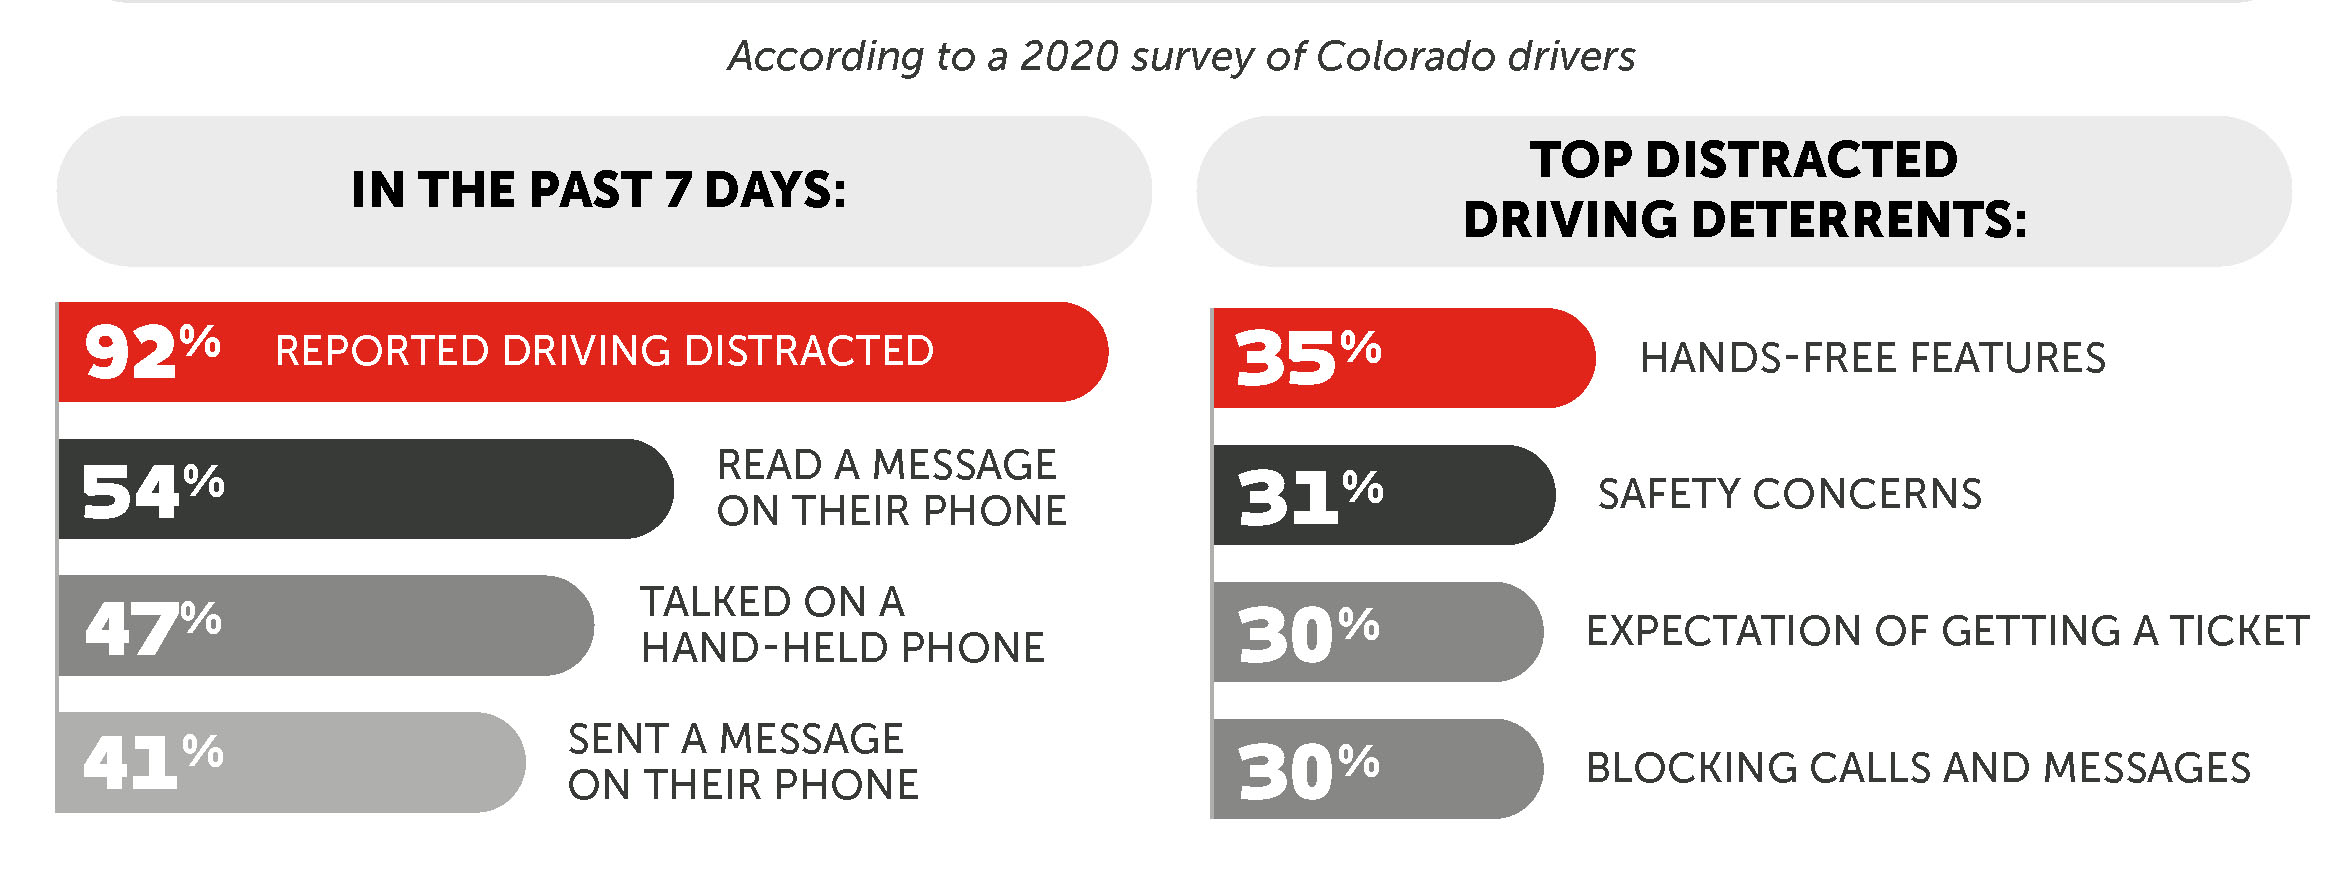 Distracted Driving Survey 2020 - Top Distracted Driving Deterrents detail image